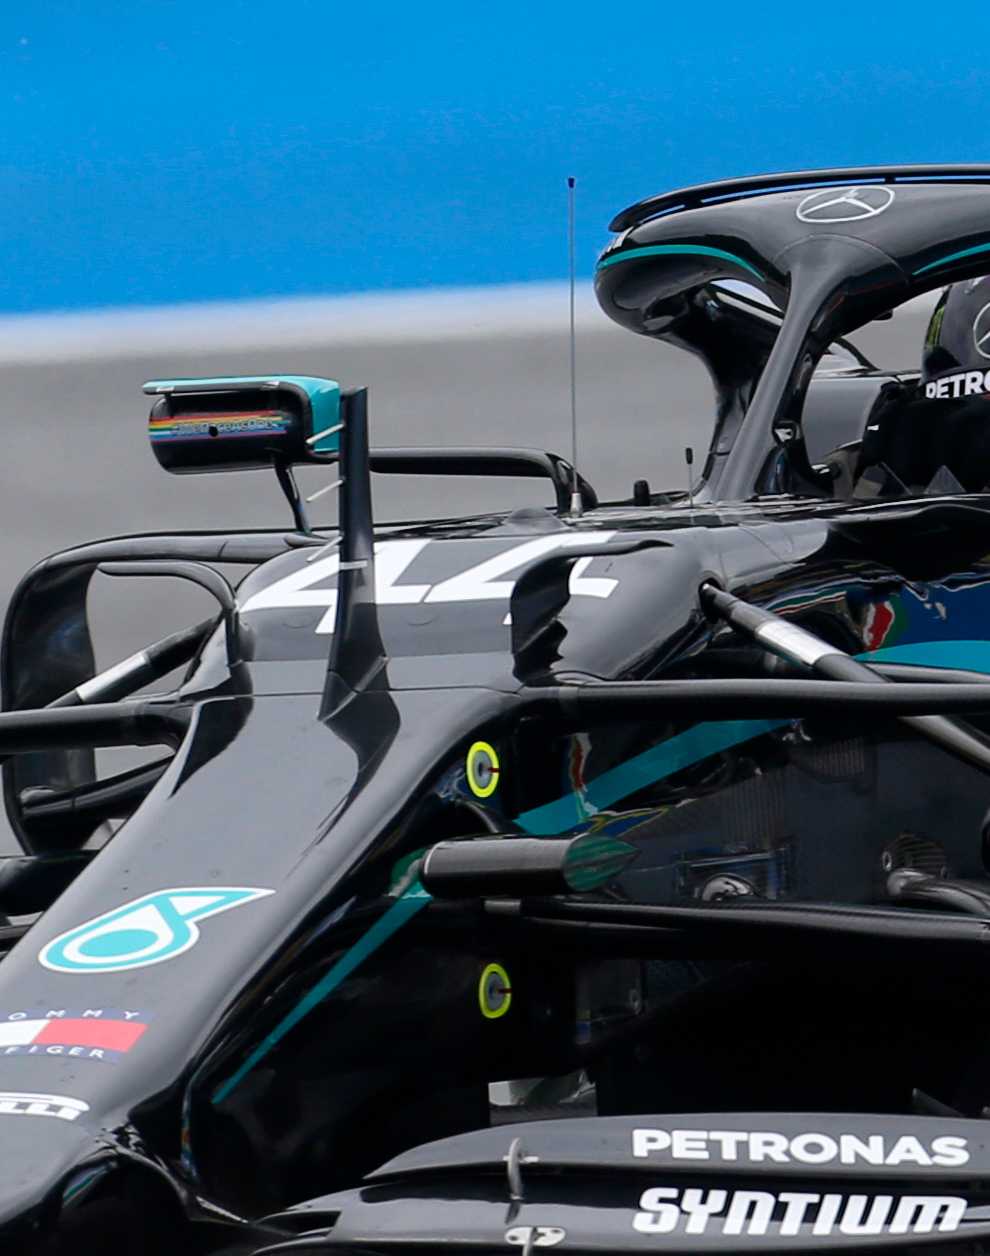 Mercedes' steering system has been banned for 2021